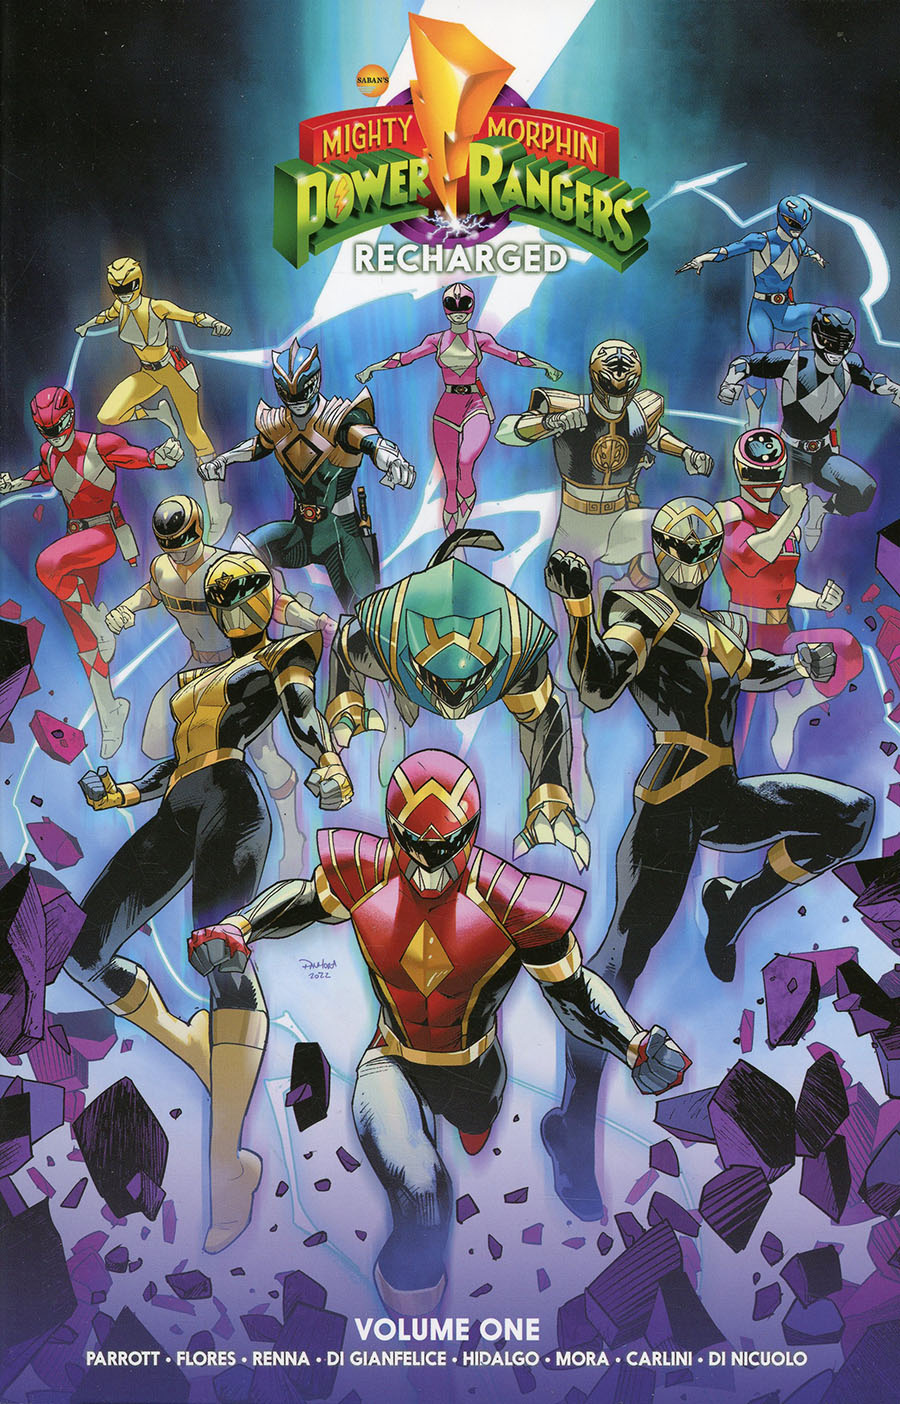 Mighty Morphin Power Rangers Recharged Vol 1 TP